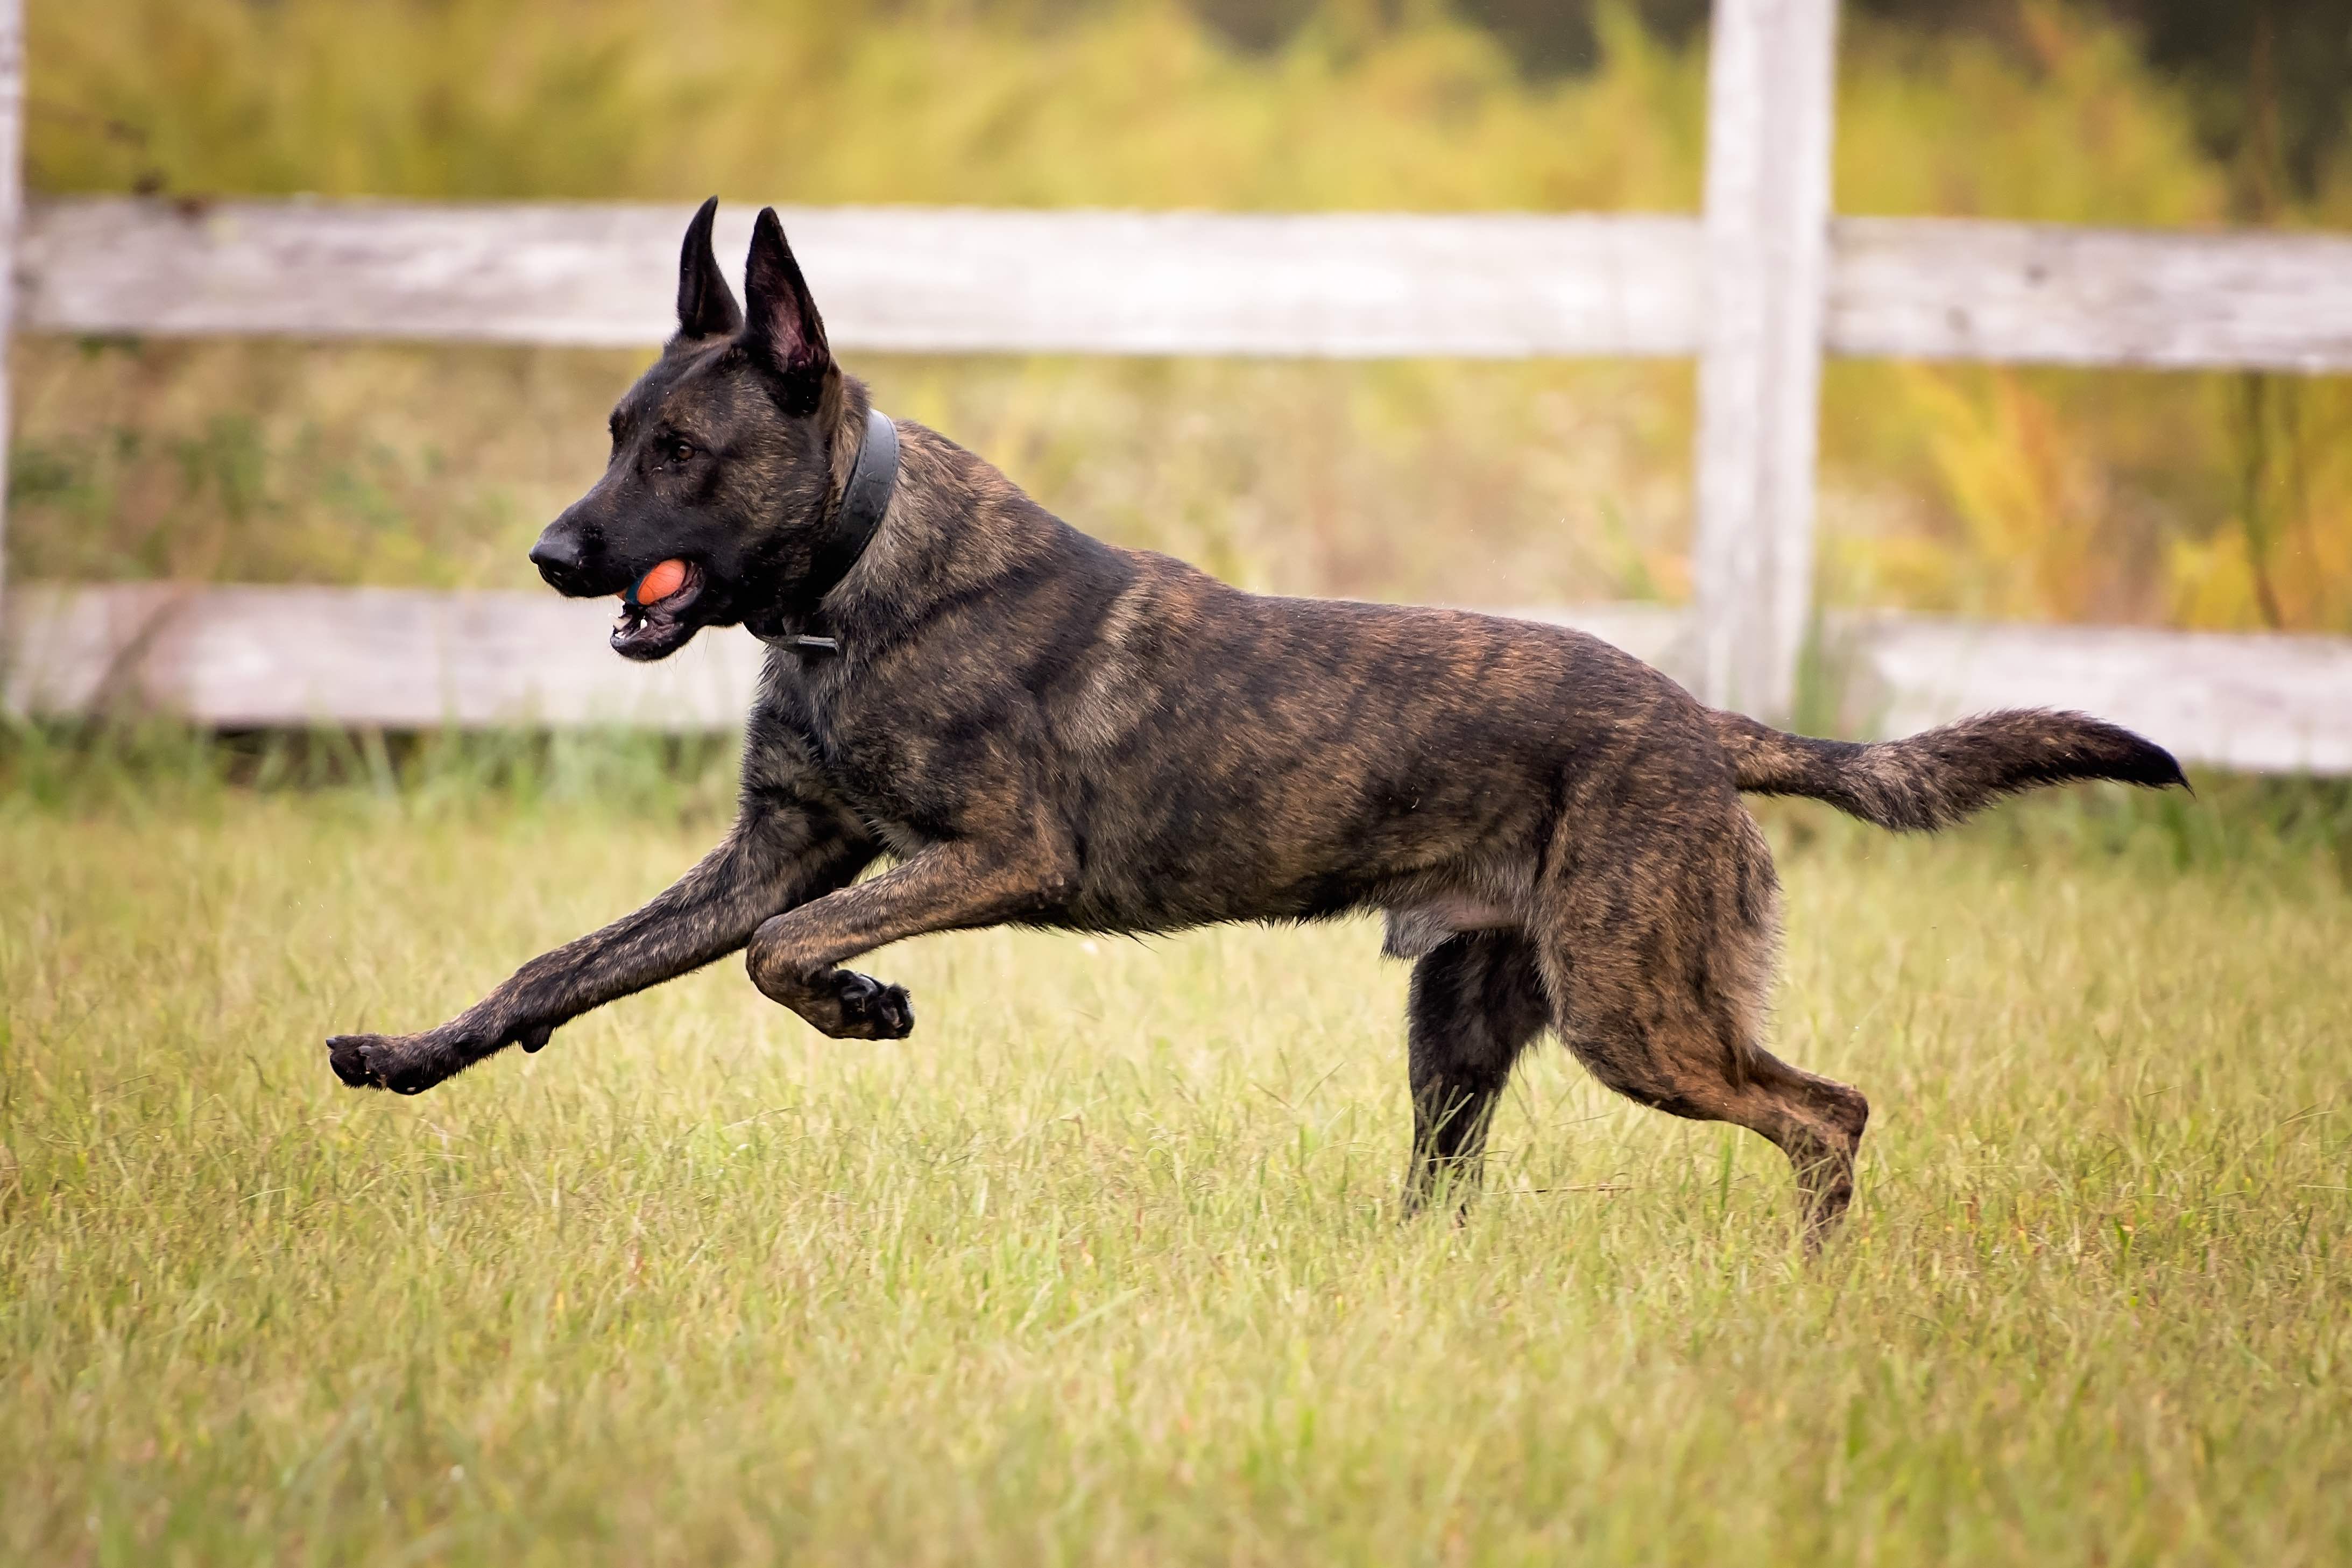 brindle dutch shepherd running with a ball in his mouth